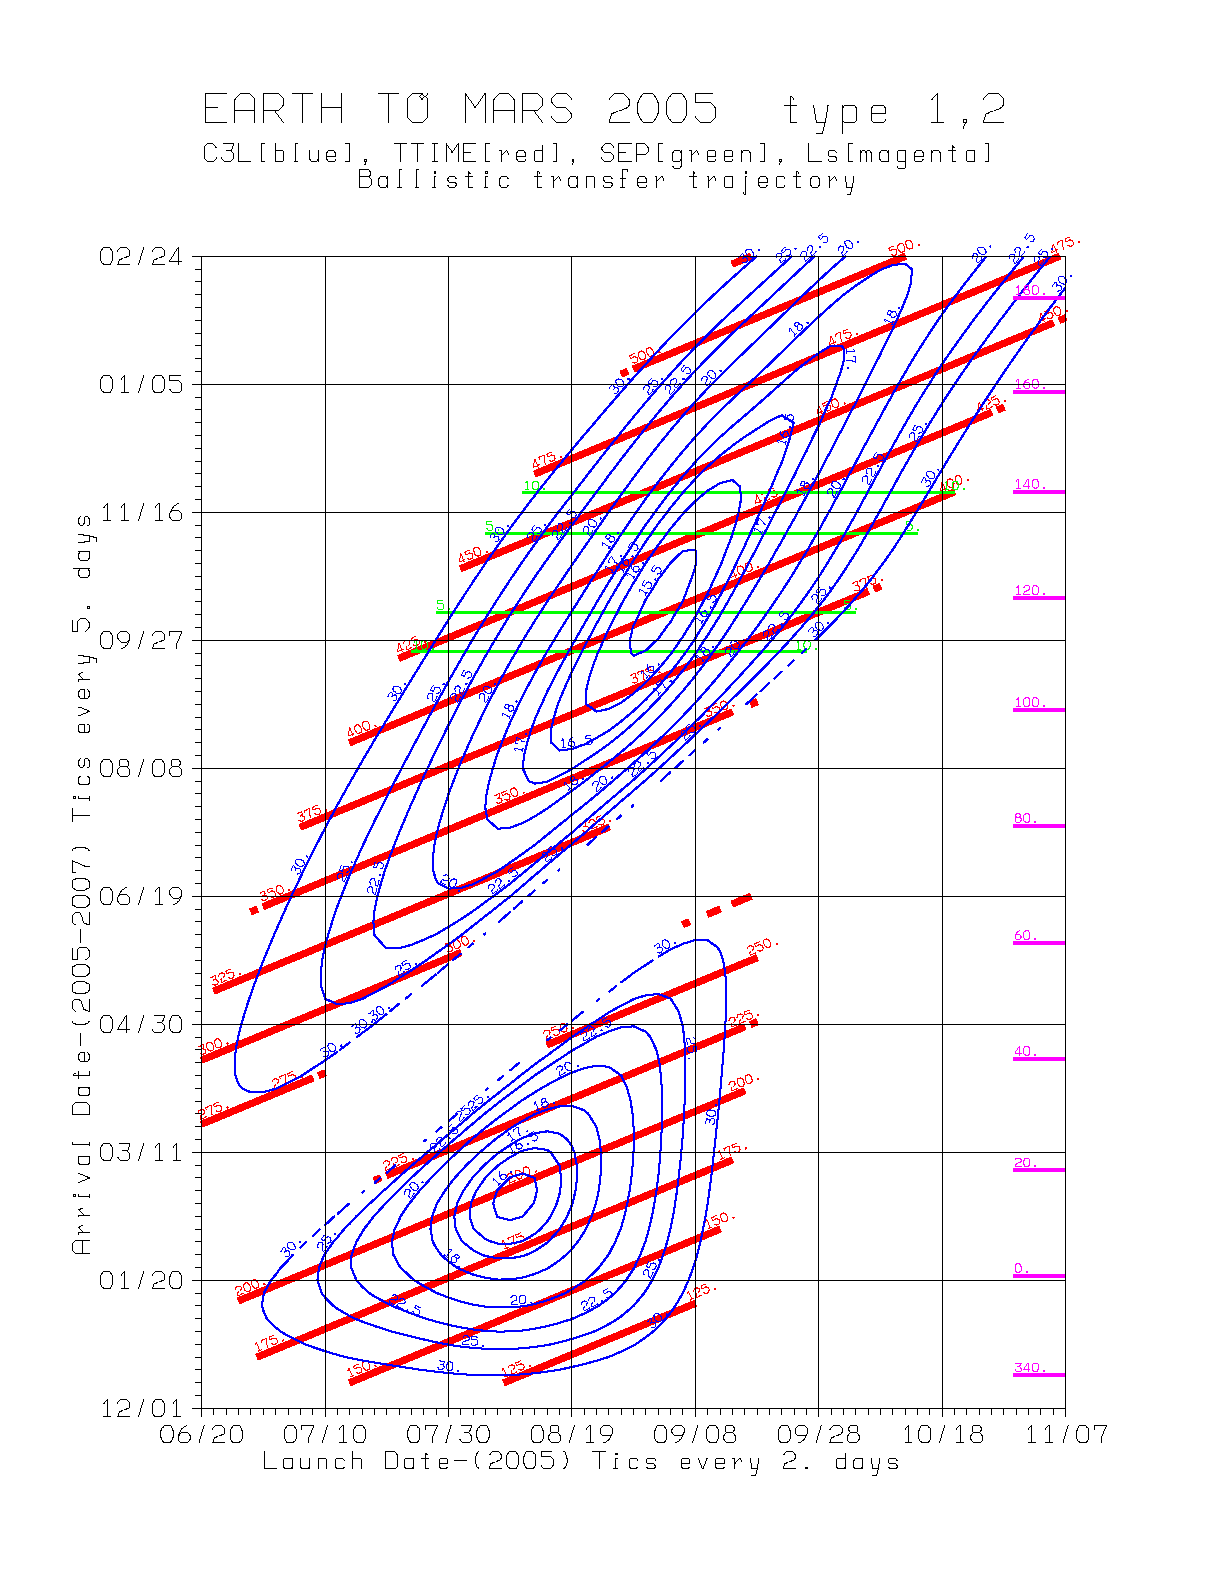 Porkchop plot for transfer from Earth to Mars in 2005